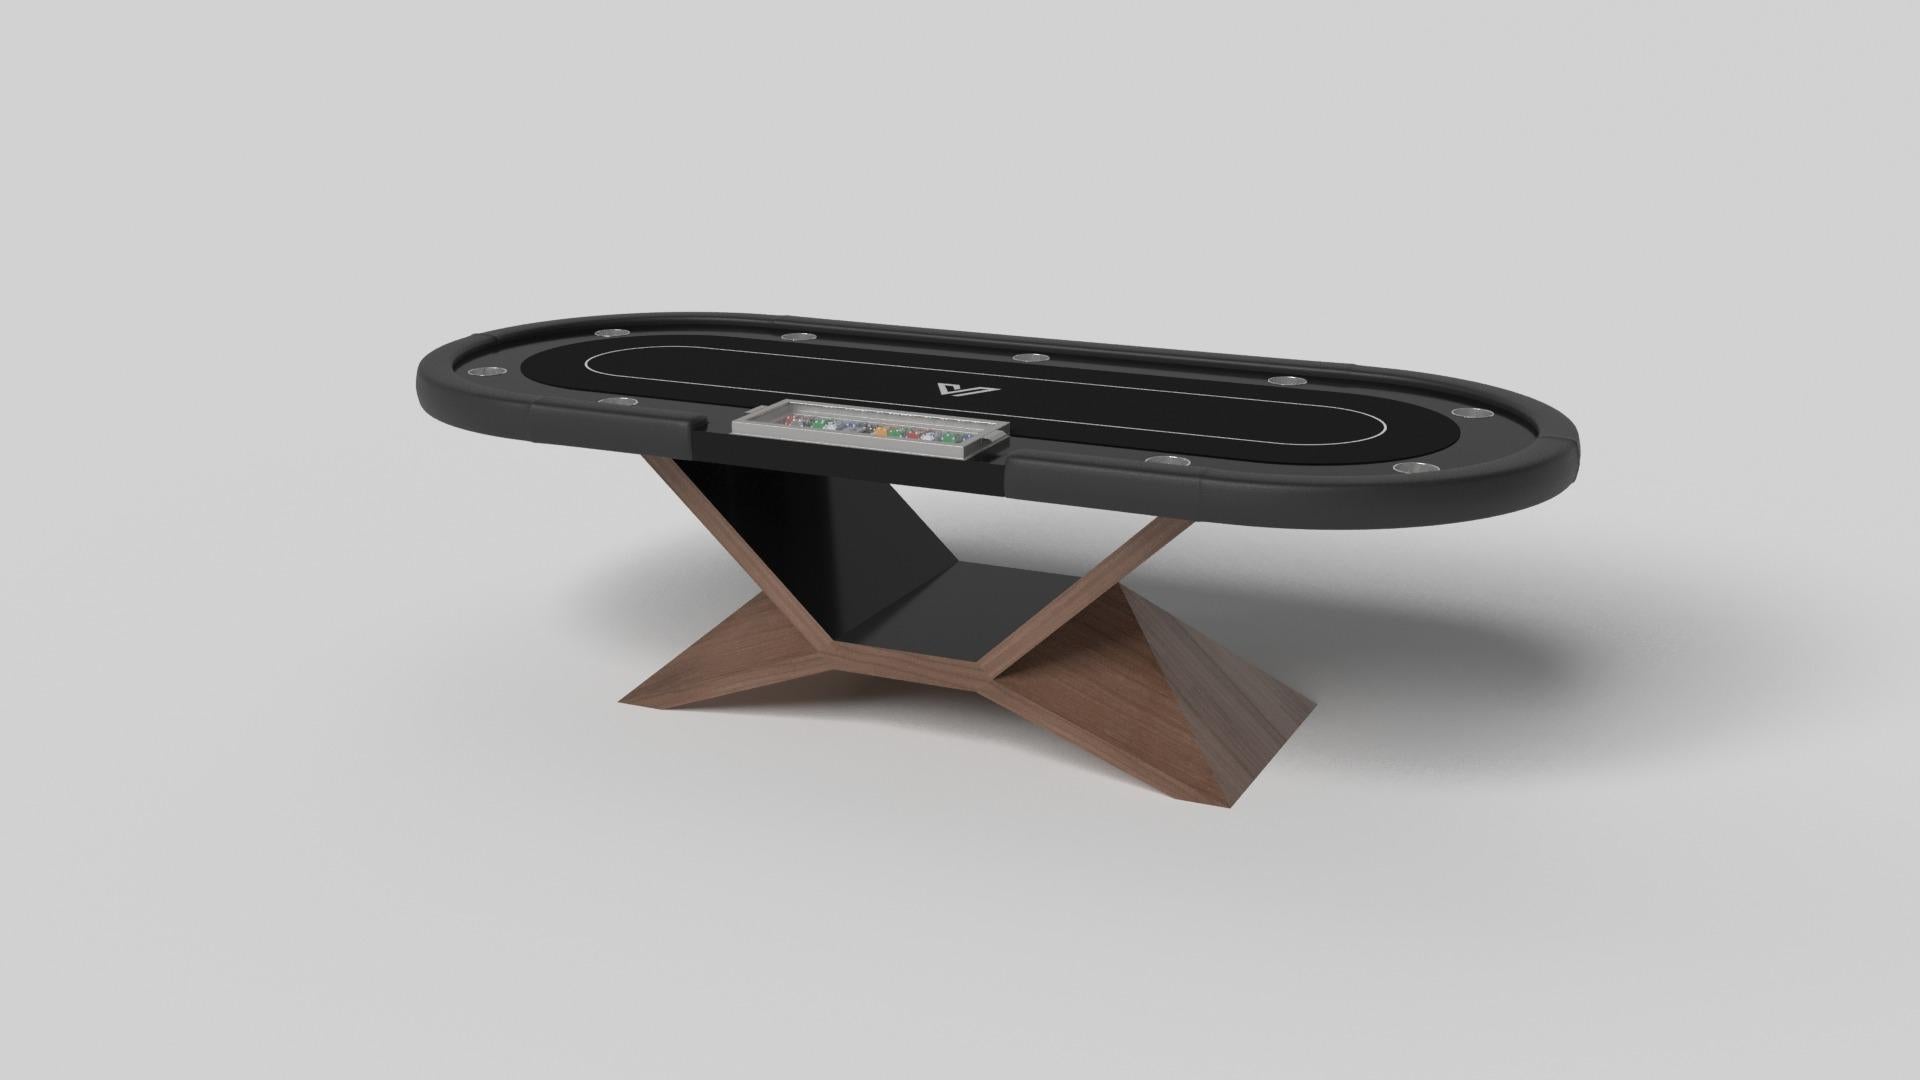 In chrome, the Kors poker table is a superior example of contrasting geometric forms. This table features an angular base that highlights the beauty of negative space from the front view. From the side view, it offers a completely different